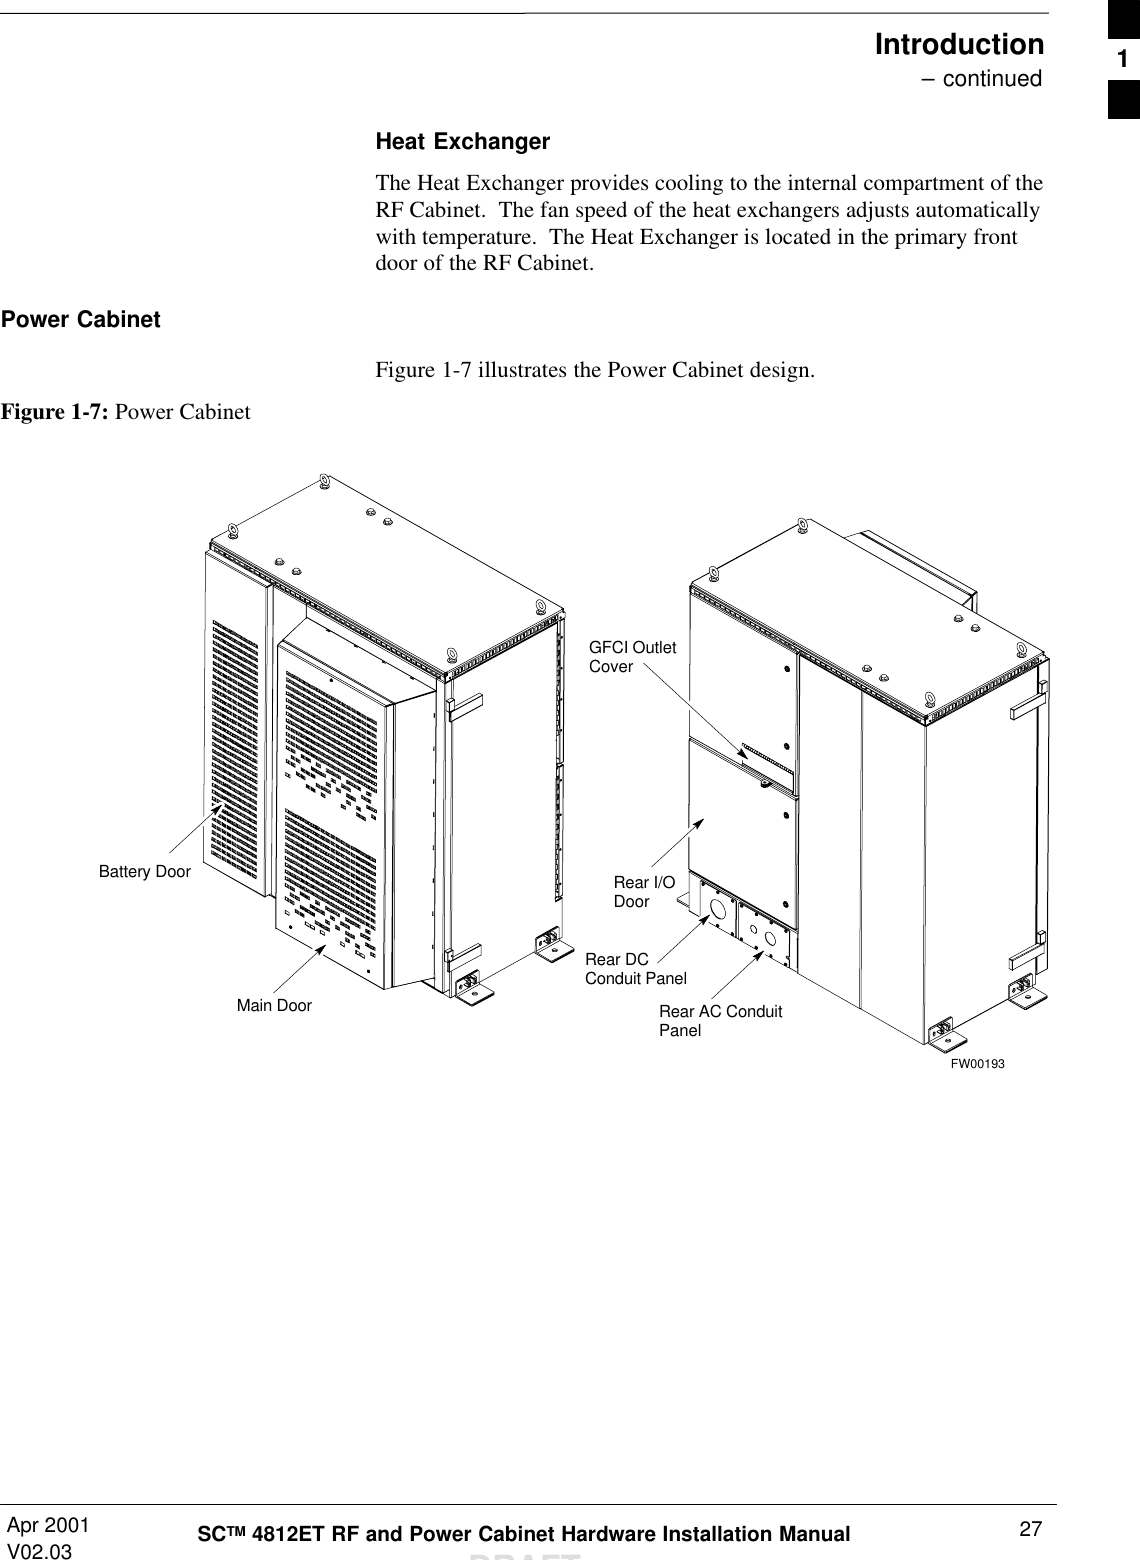 Introduction – continuedApr 2001V02.03 27SCTM 4812ET RF and Power Cabinet Hardware Installation ManualDRAFTHeat ExchangerThe Heat Exchanger provides cooling to the internal compartment of theRF Cabinet.  The fan speed of the heat exchangers adjusts automaticallywith temperature.  The Heat Exchanger is located in the primary frontdoor of the RF Cabinet.Power CabinetFigure 1-7 illustrates the Power Cabinet design.Figure 1-7: Power CabinetGFCI OutletCoverRear I/ODoorRear AC ConduitPanelBattery DoorMain DoorRear DCConduit PanelFW001931